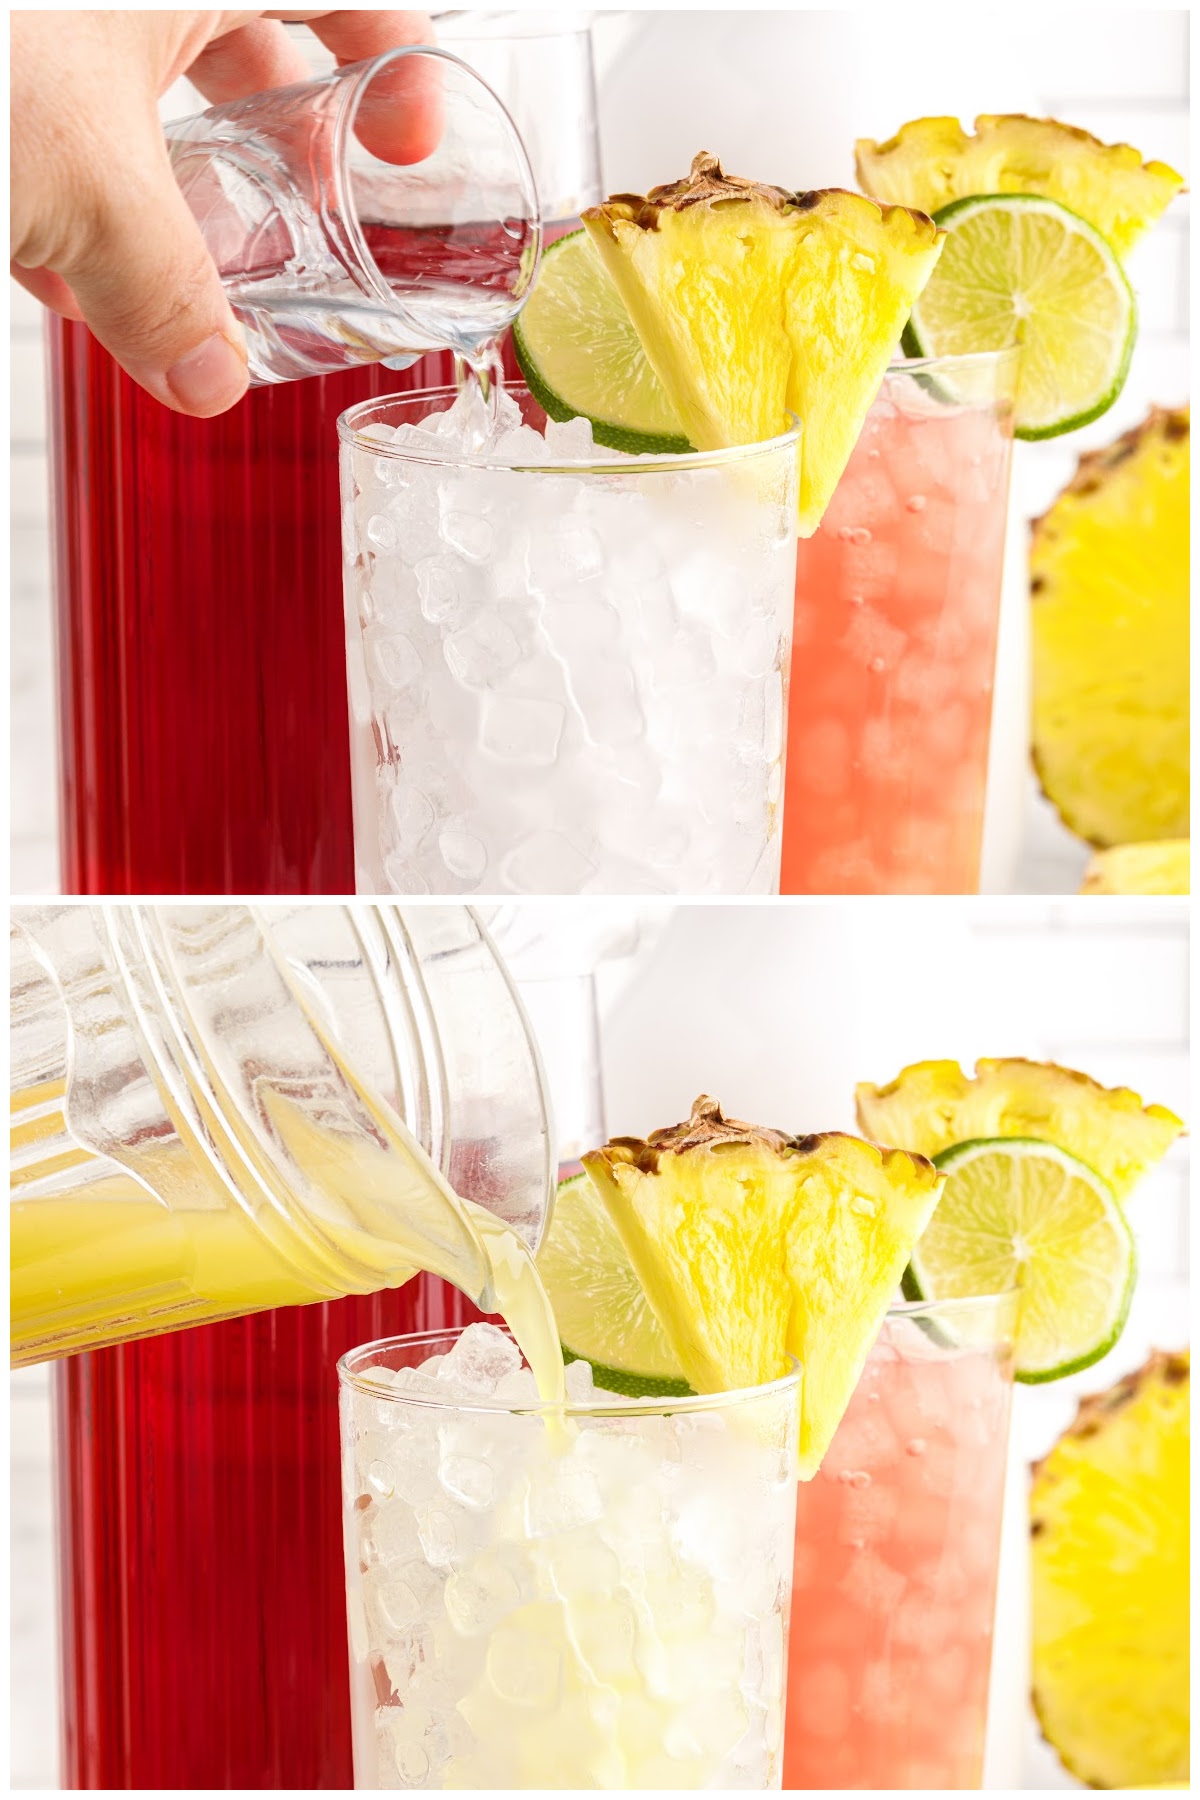 Two images of rum added to a glassful of ice and pineapple juice added.